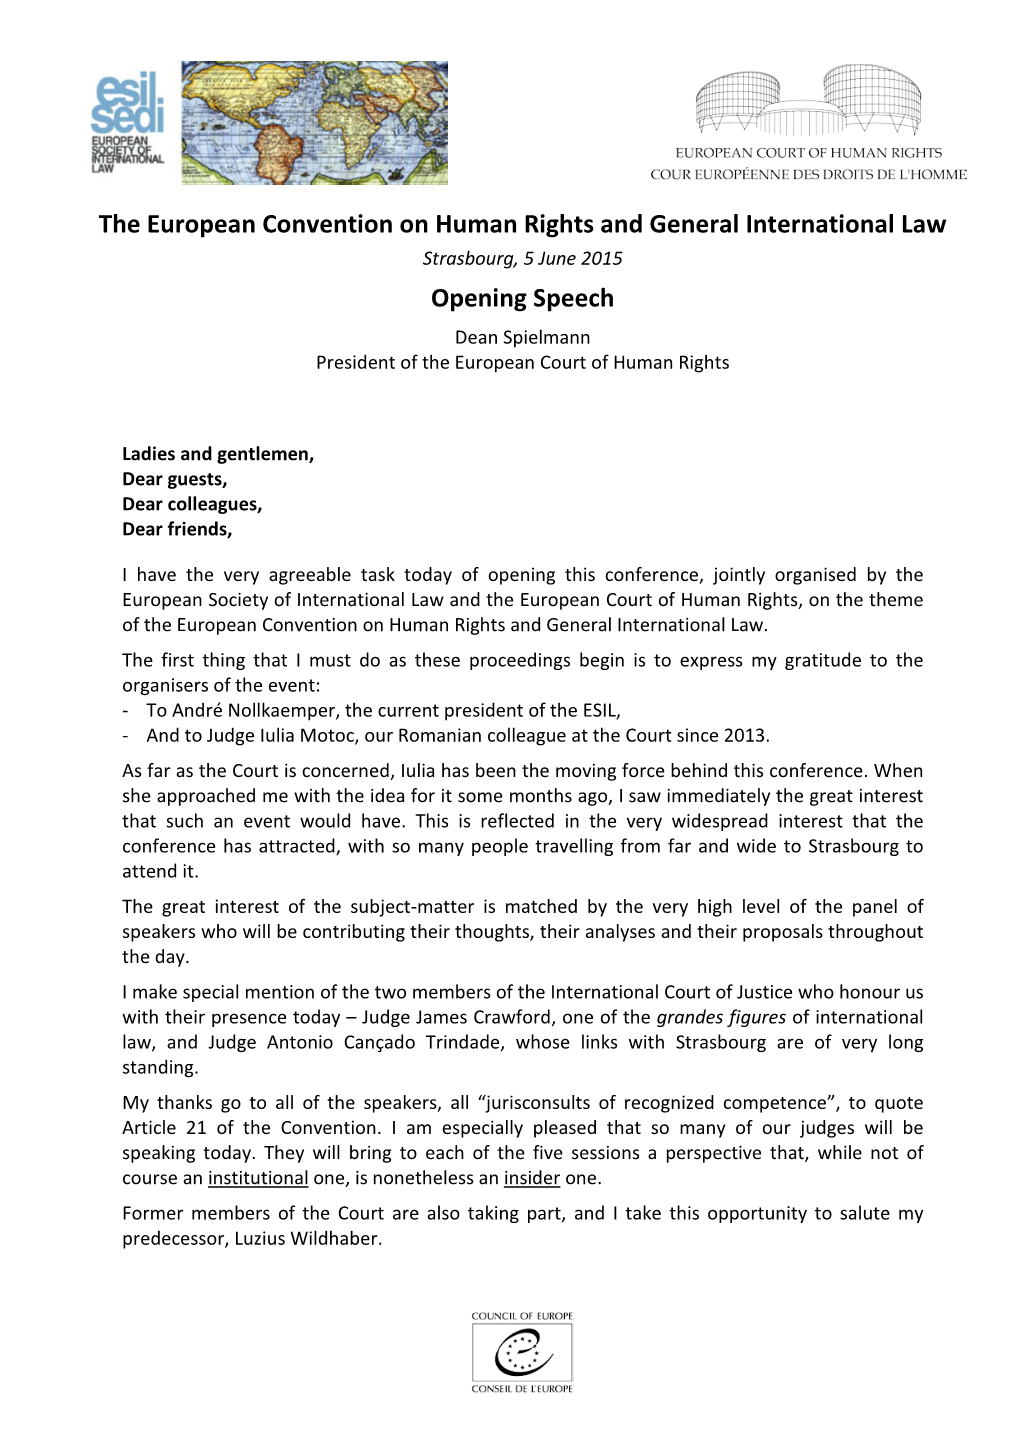 The European Convention on Human Rights and General International